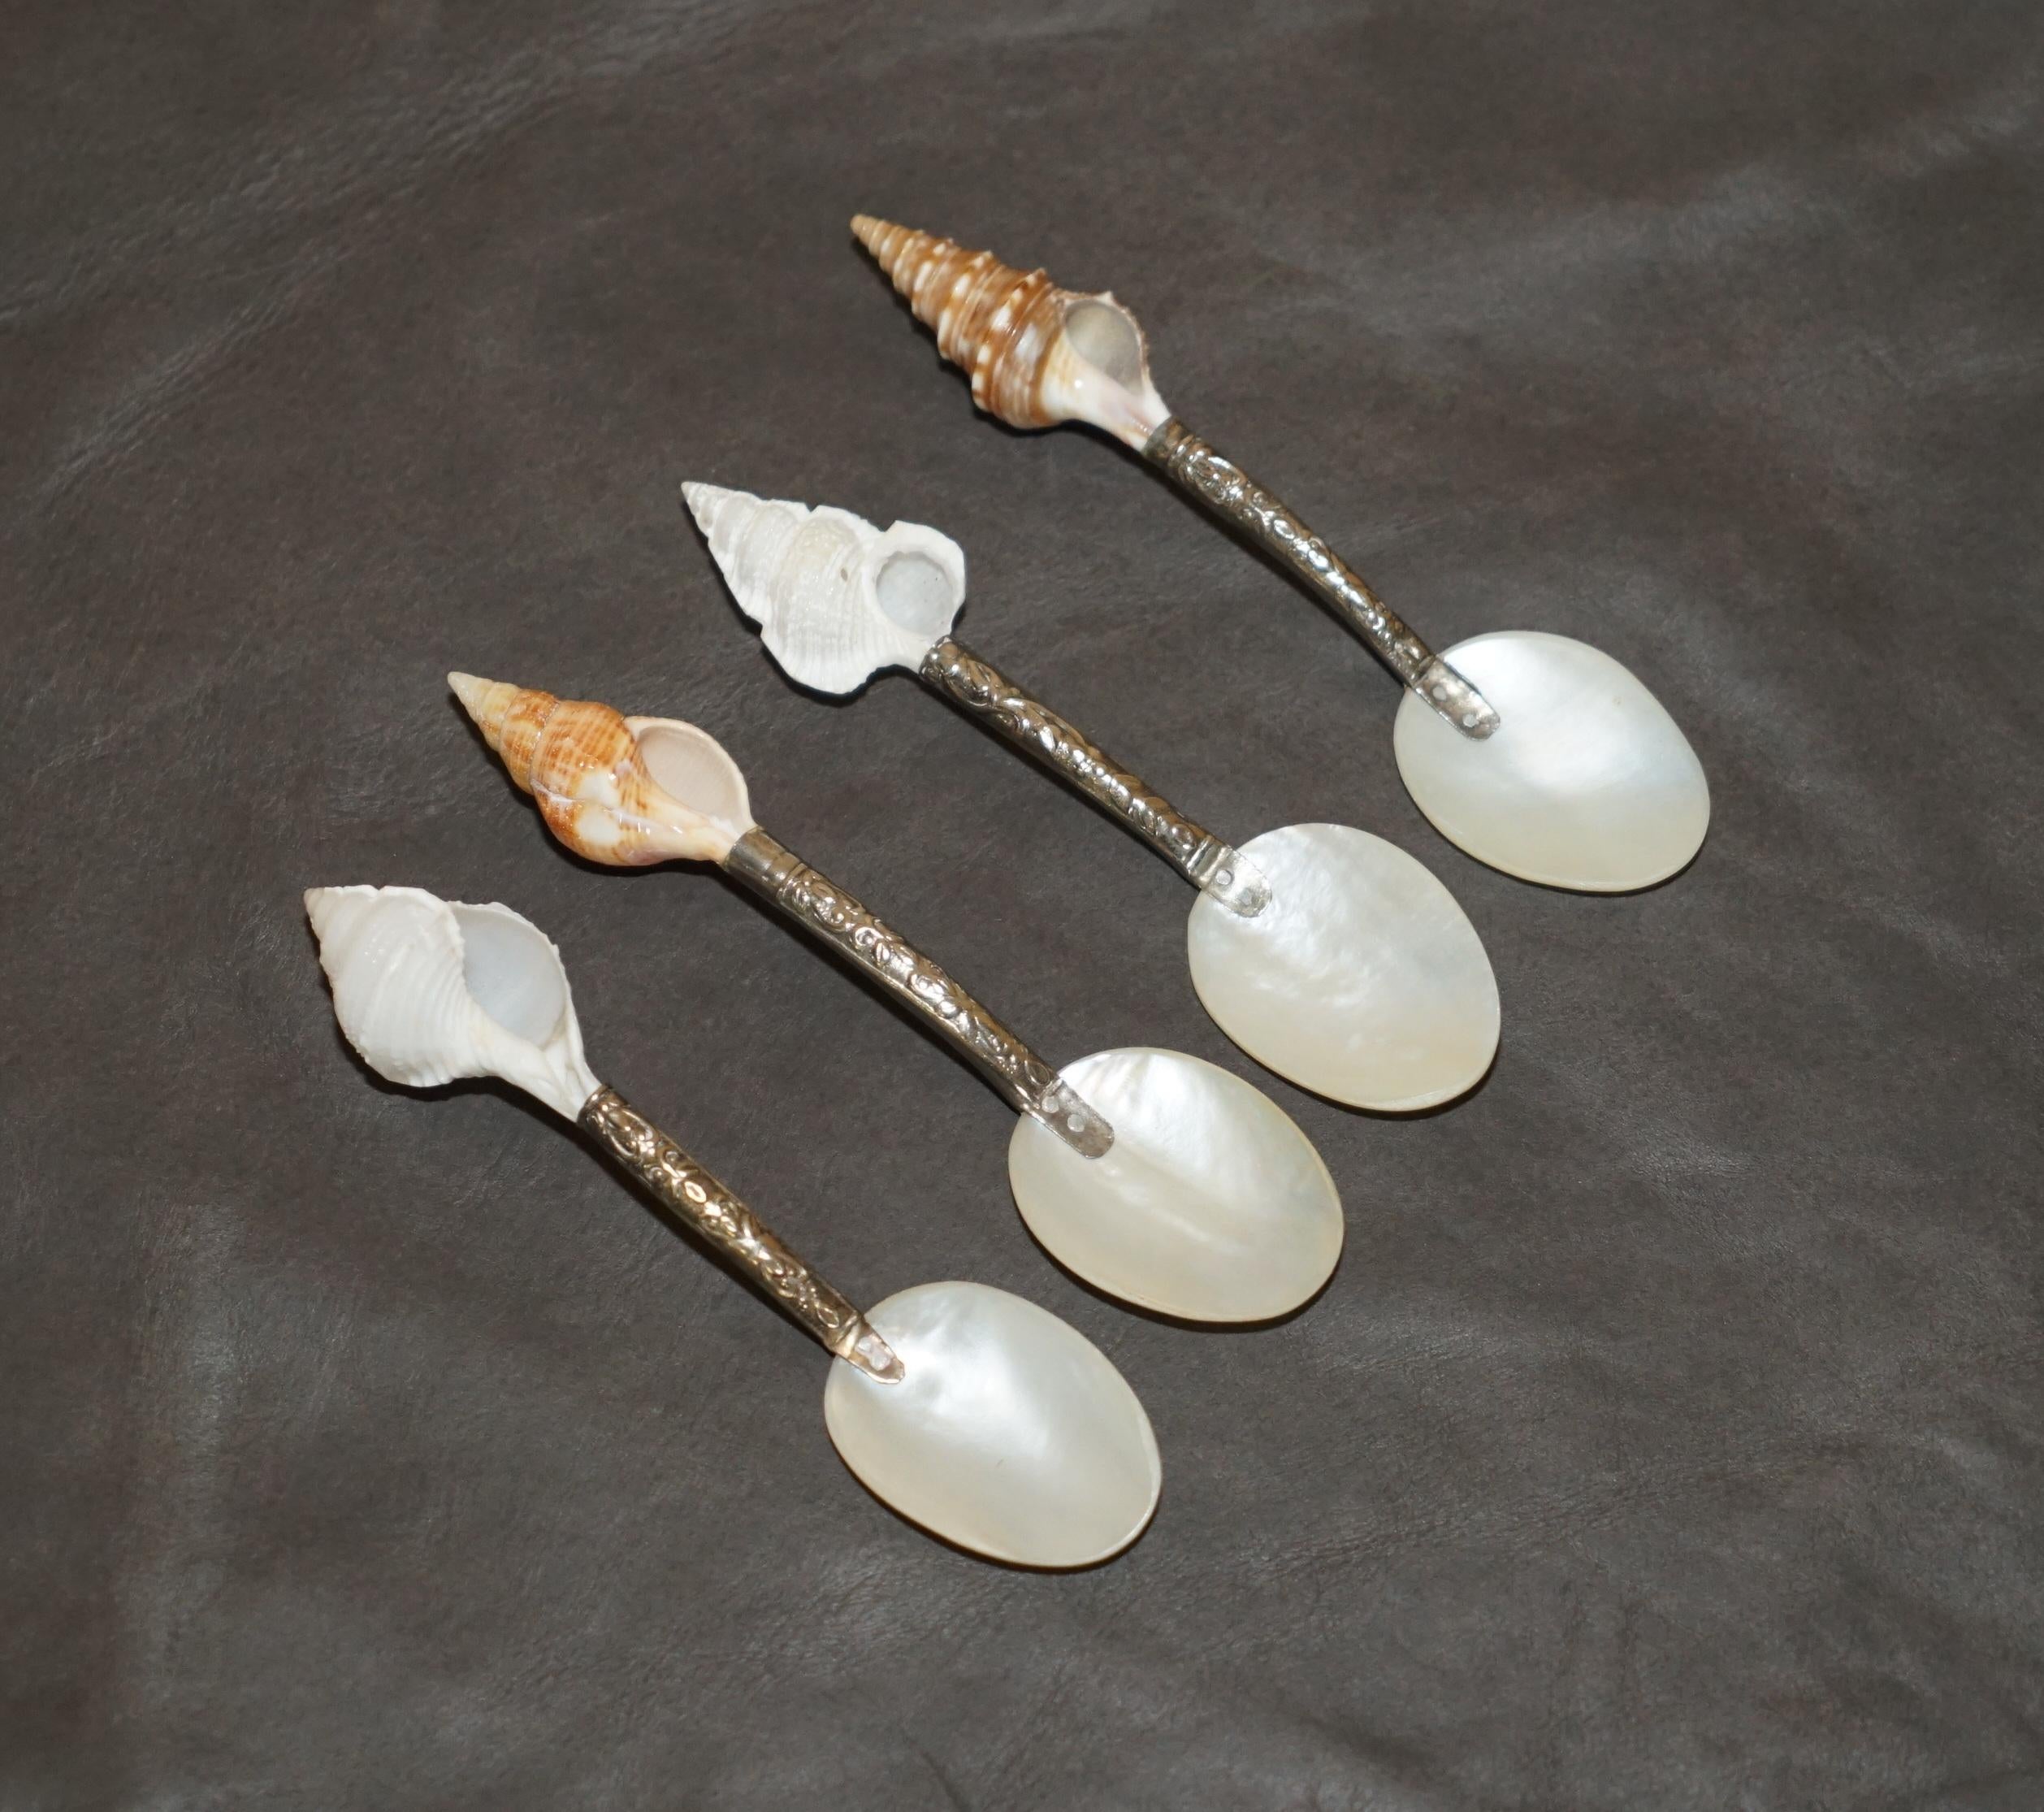 Royal House Antiques

Royal House Antiques is delighted to offer for sale this stunning suite of four mother of pearl sterling silver tested shell tea spoons

A good looking well made and decorative suite of four spoons, they have been tested (not